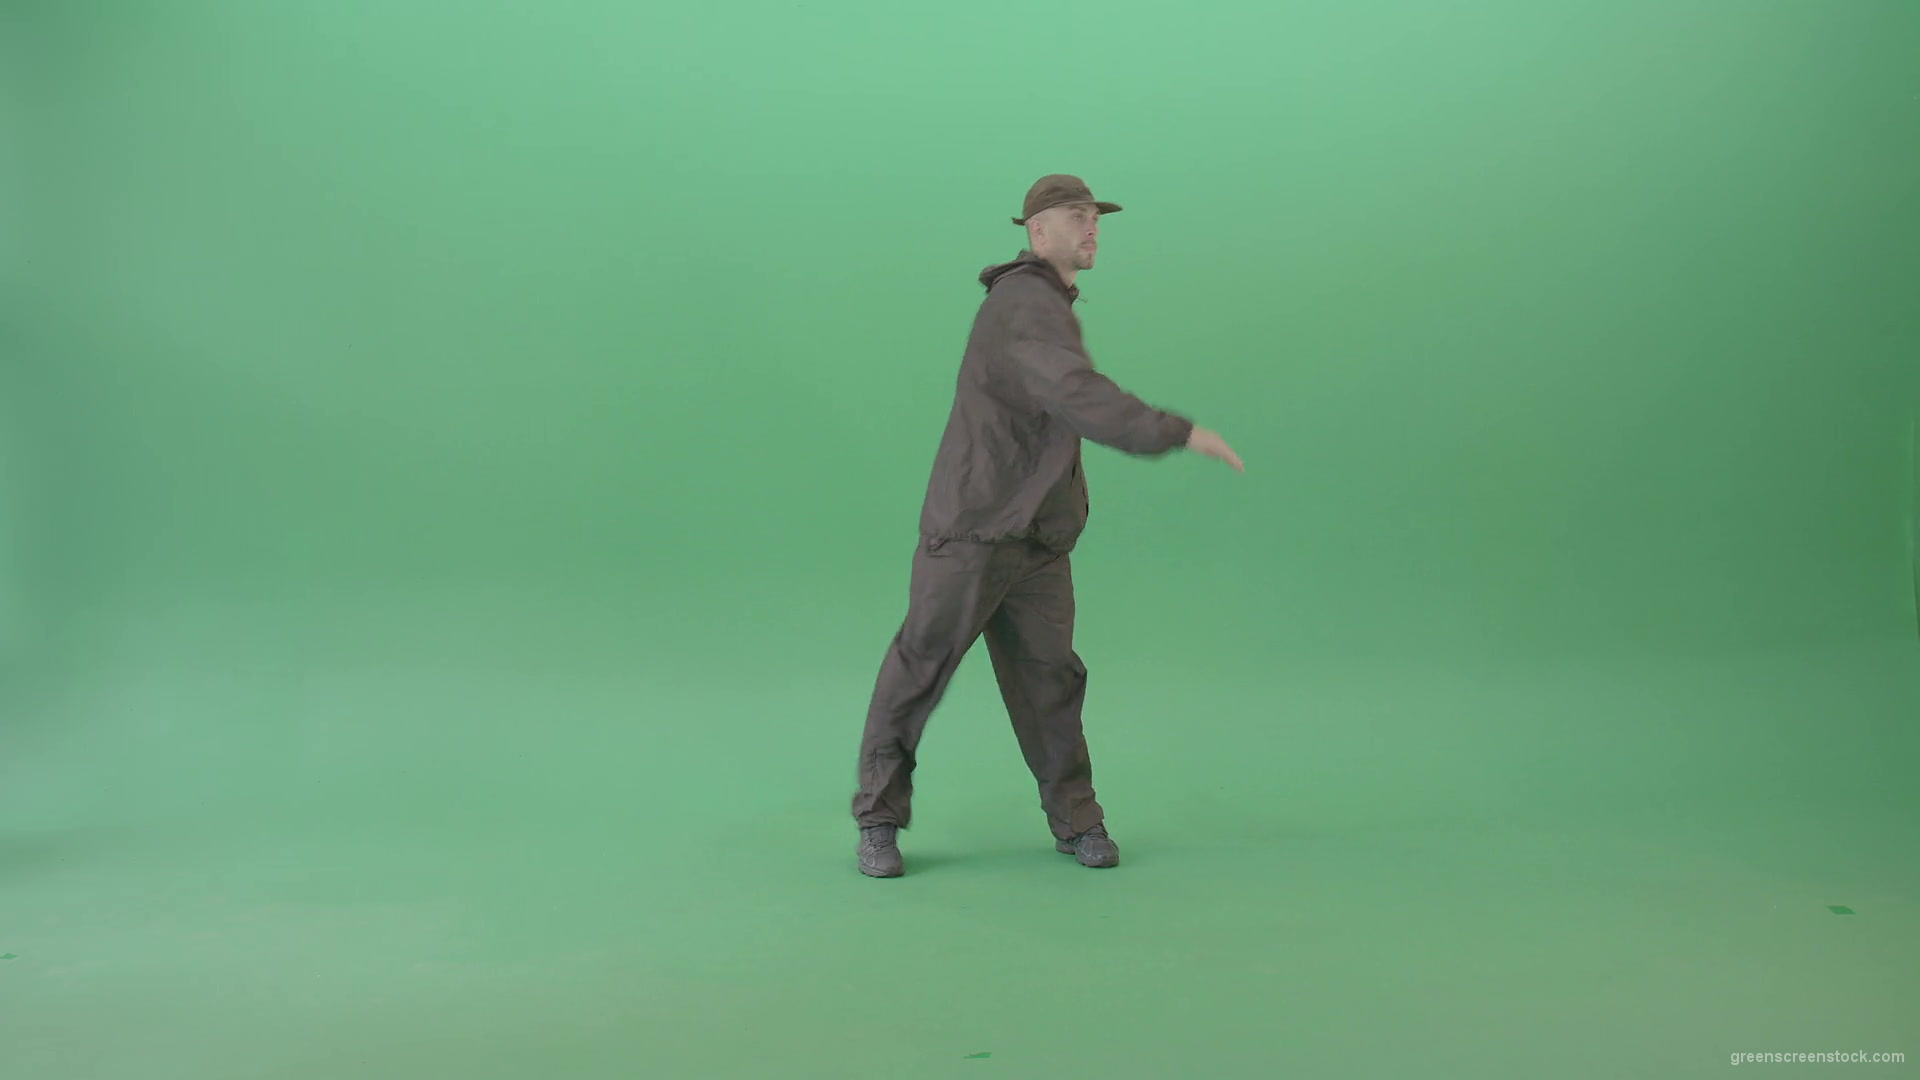 Top-Break-dance-by-electric-boogie-hip-hop-dancer-isolated-on-green-screen-4K-Video-Footage-1920_008 Green Screen Stock